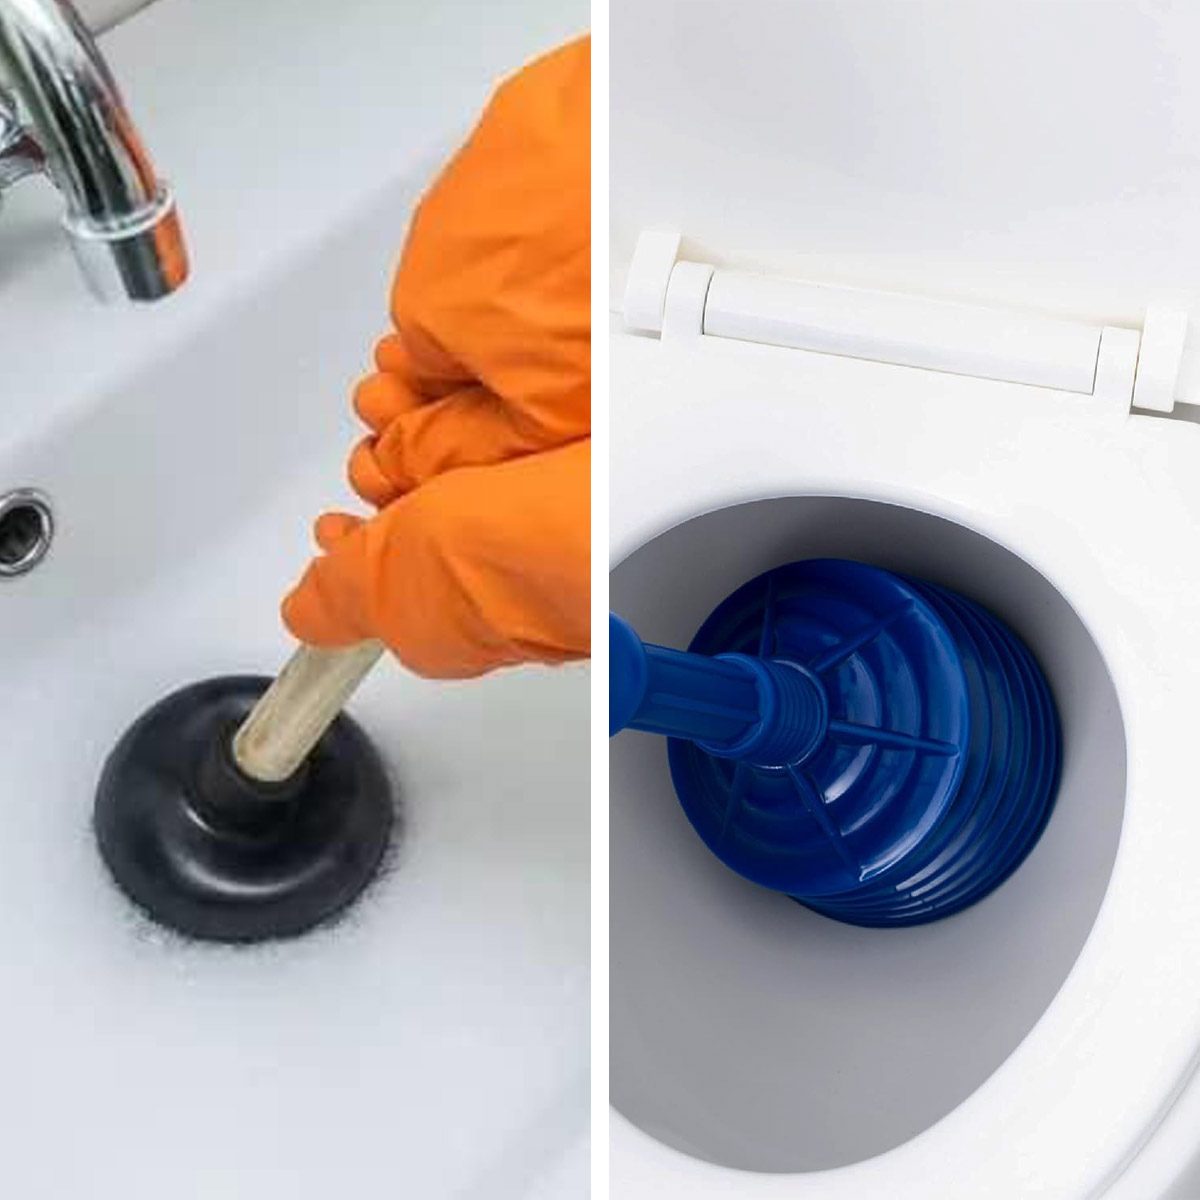 Flange Plunger vs. Toilet Plunger: Here's What to Use on Your